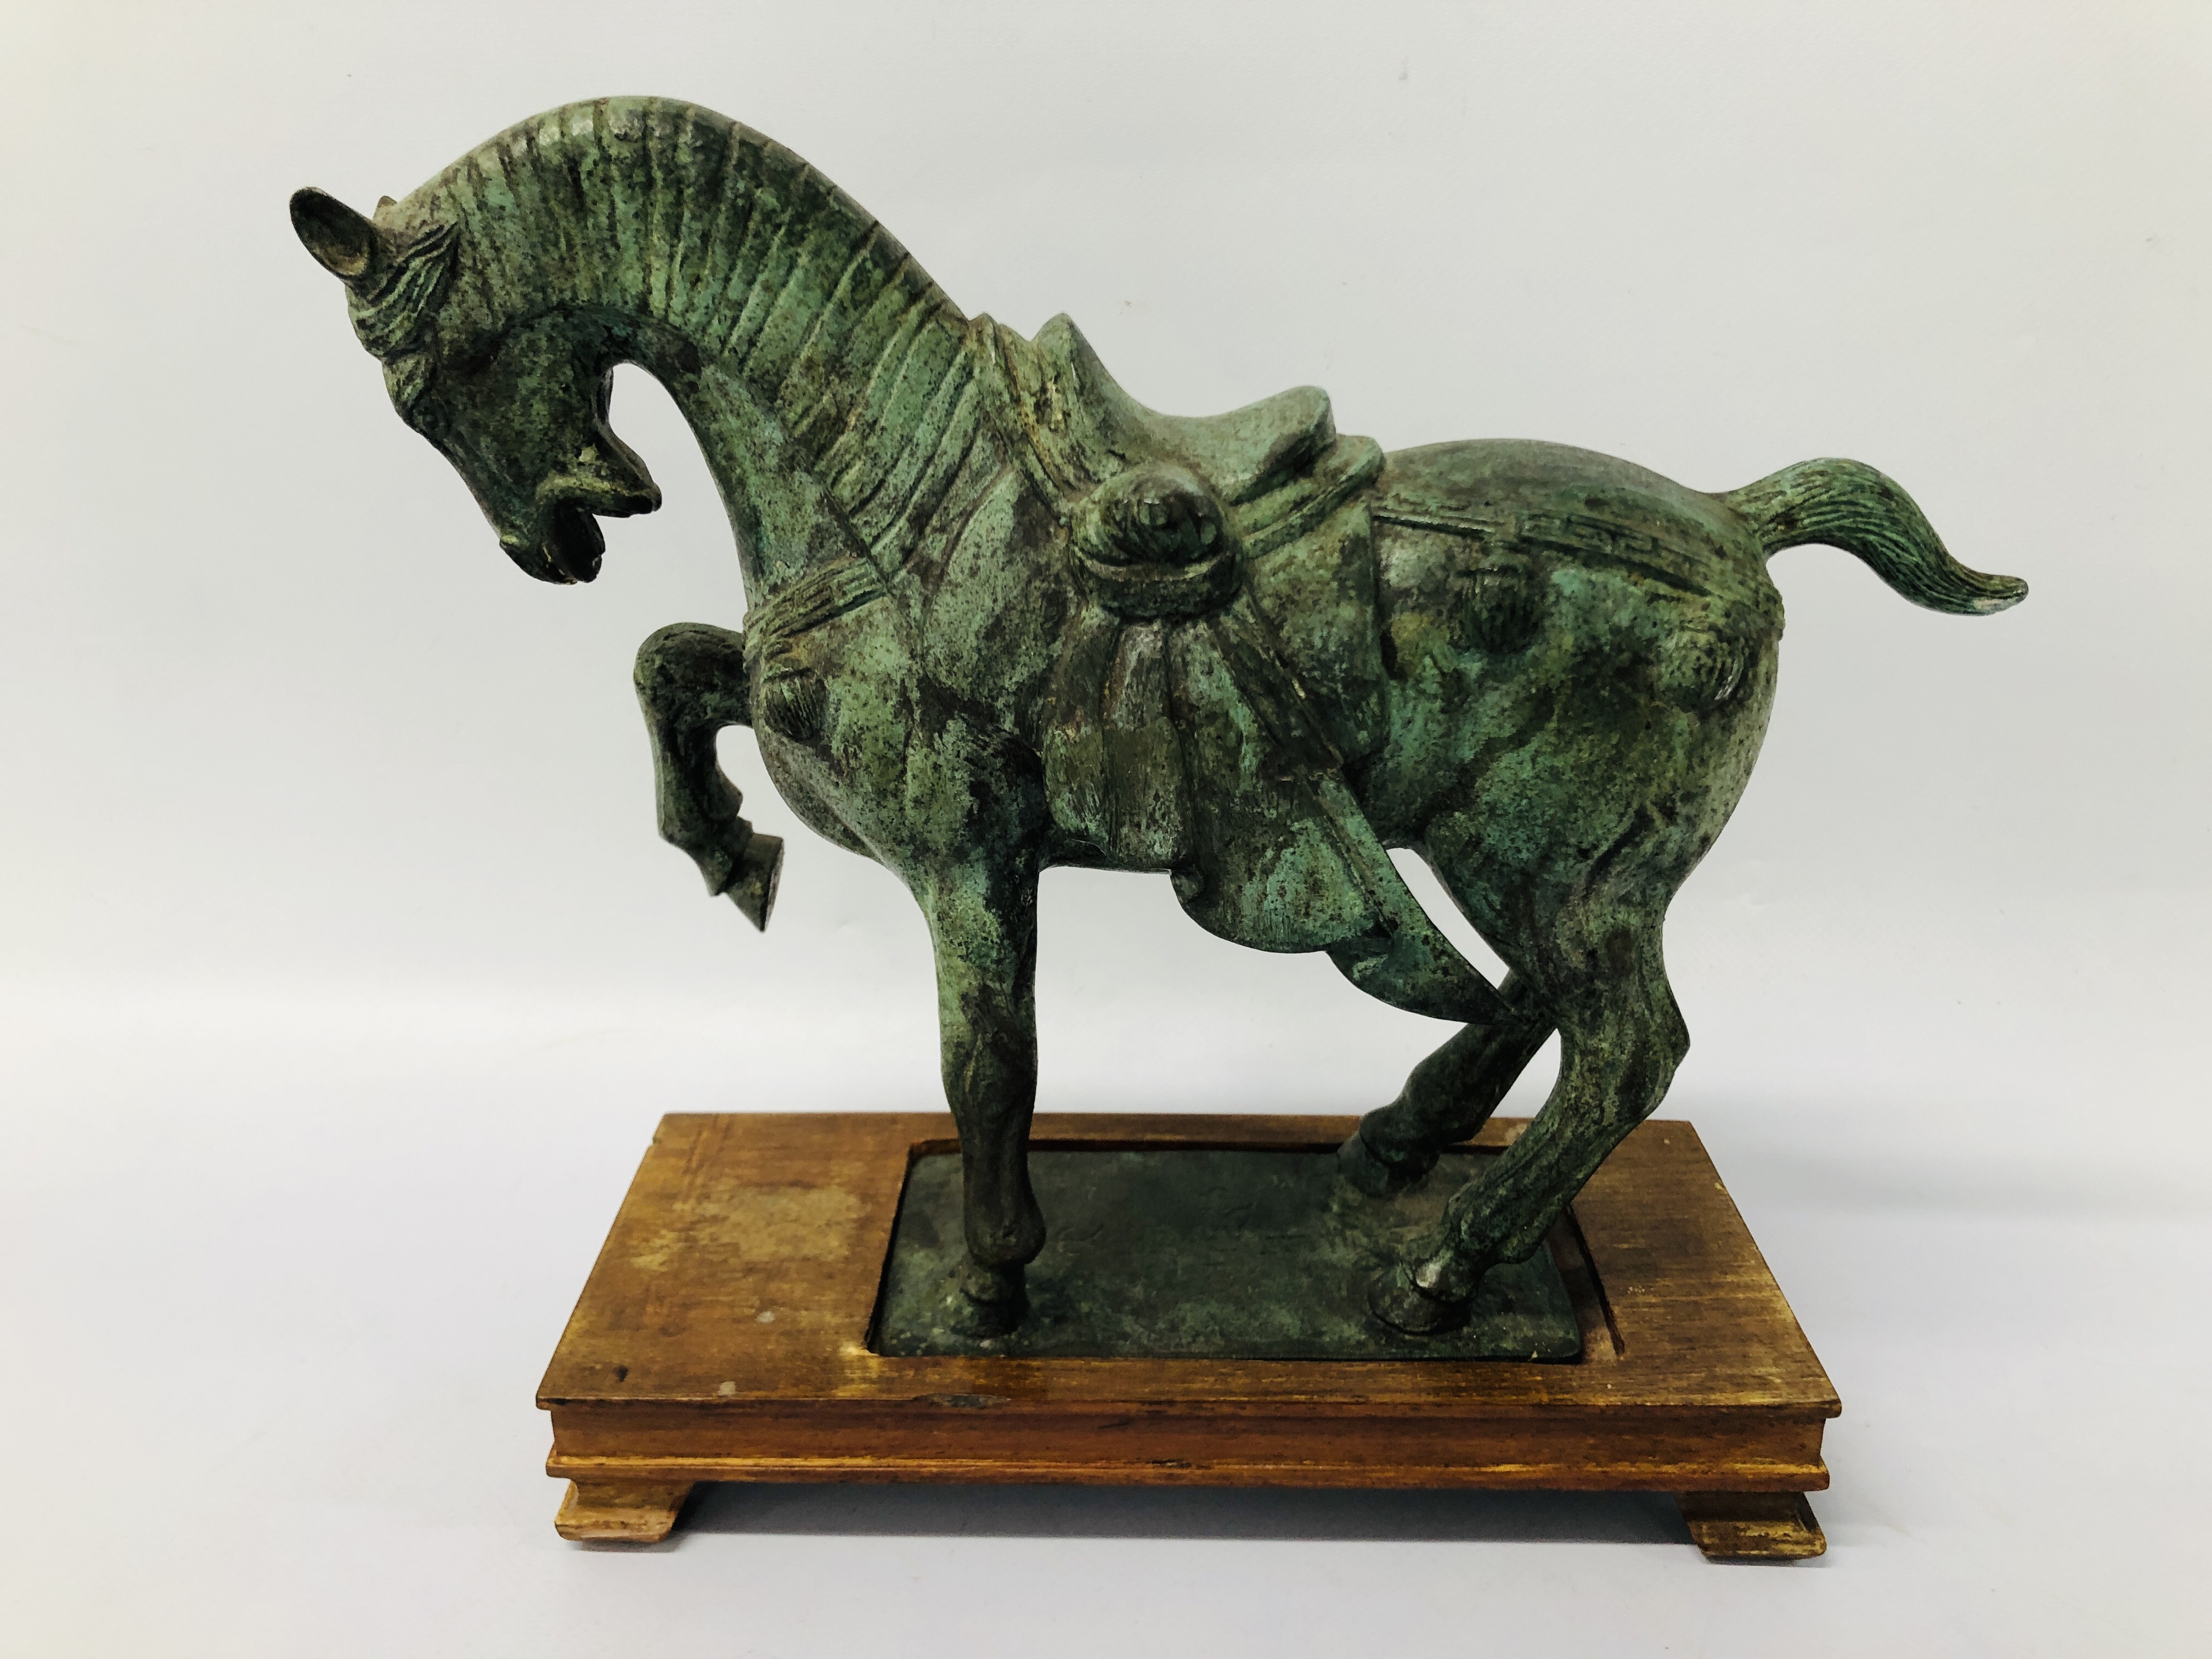 REPRODUCTION CAST TANG STYLE HORSE ON DISPLAY BASE - Image 2 of 8